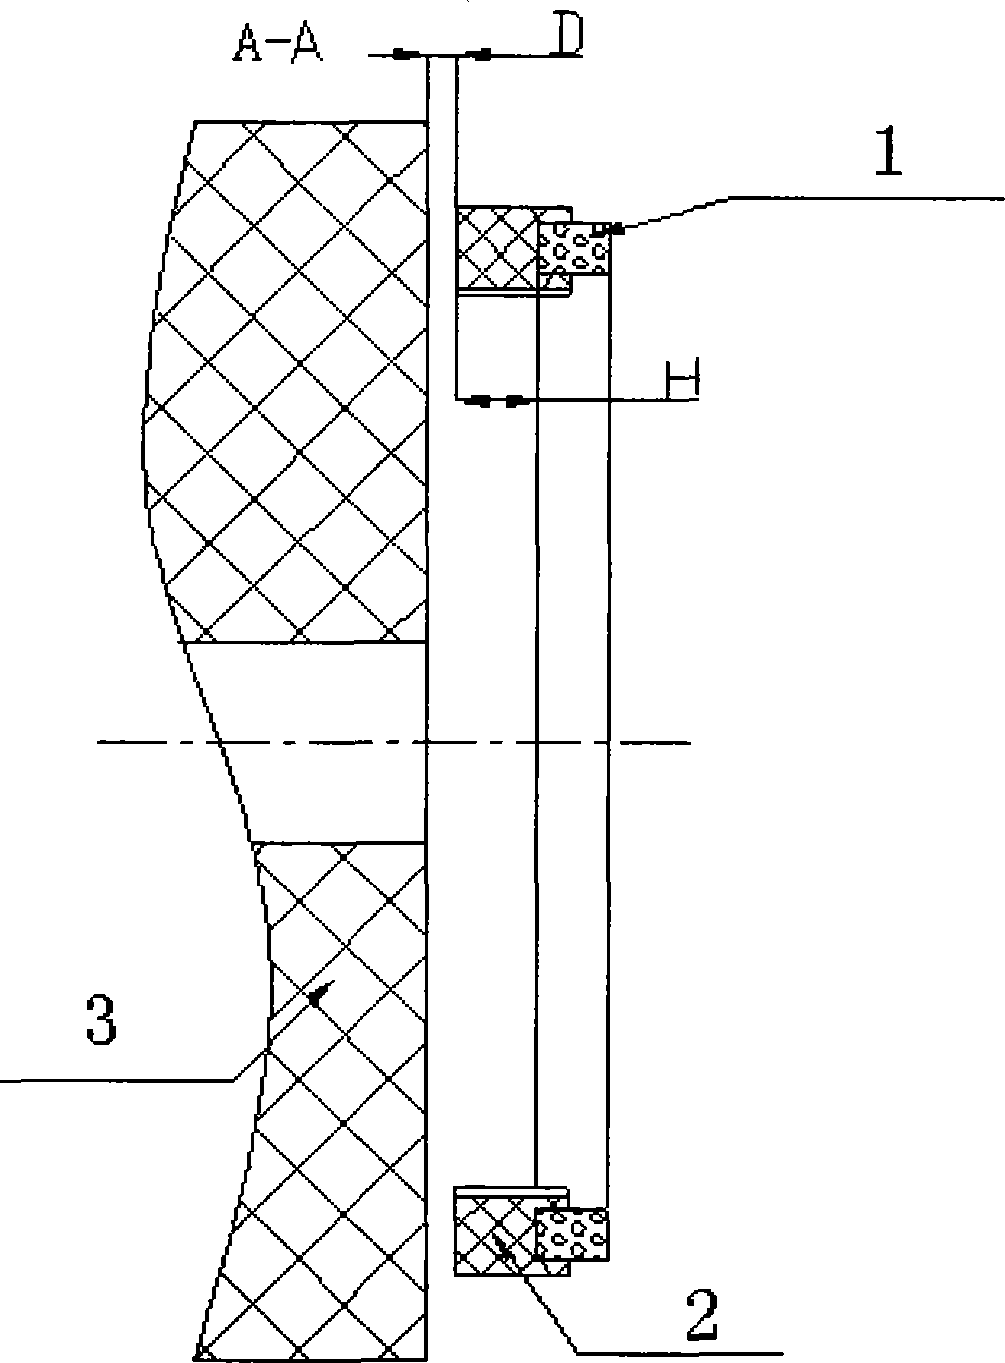 Igniting and starting device of solid rocket engine